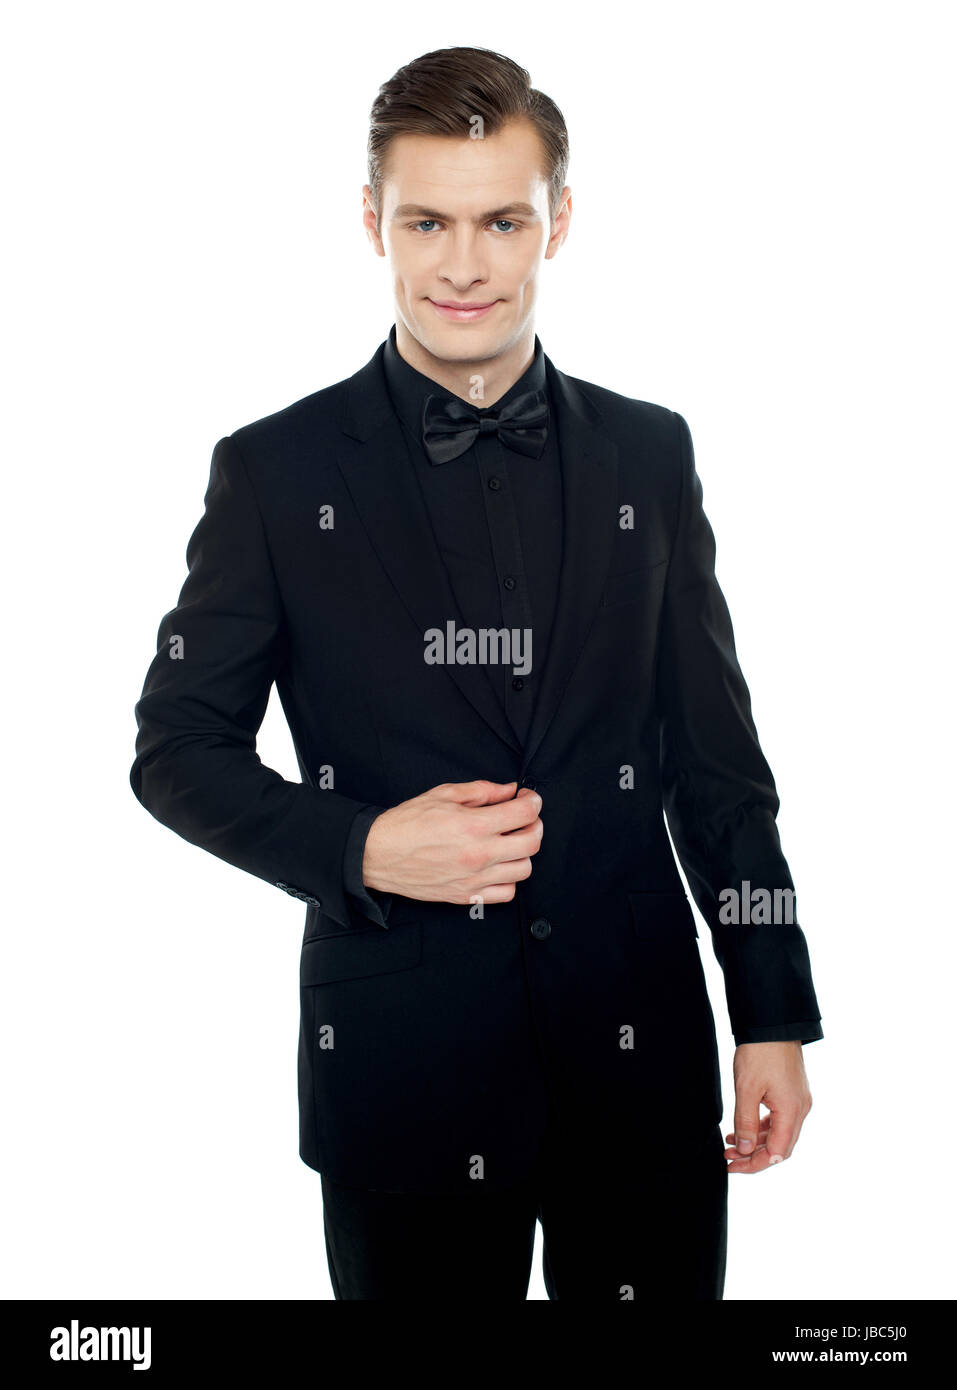 Smiling young man in party wear tenue. Annuler bouton manteau Banque D'Images